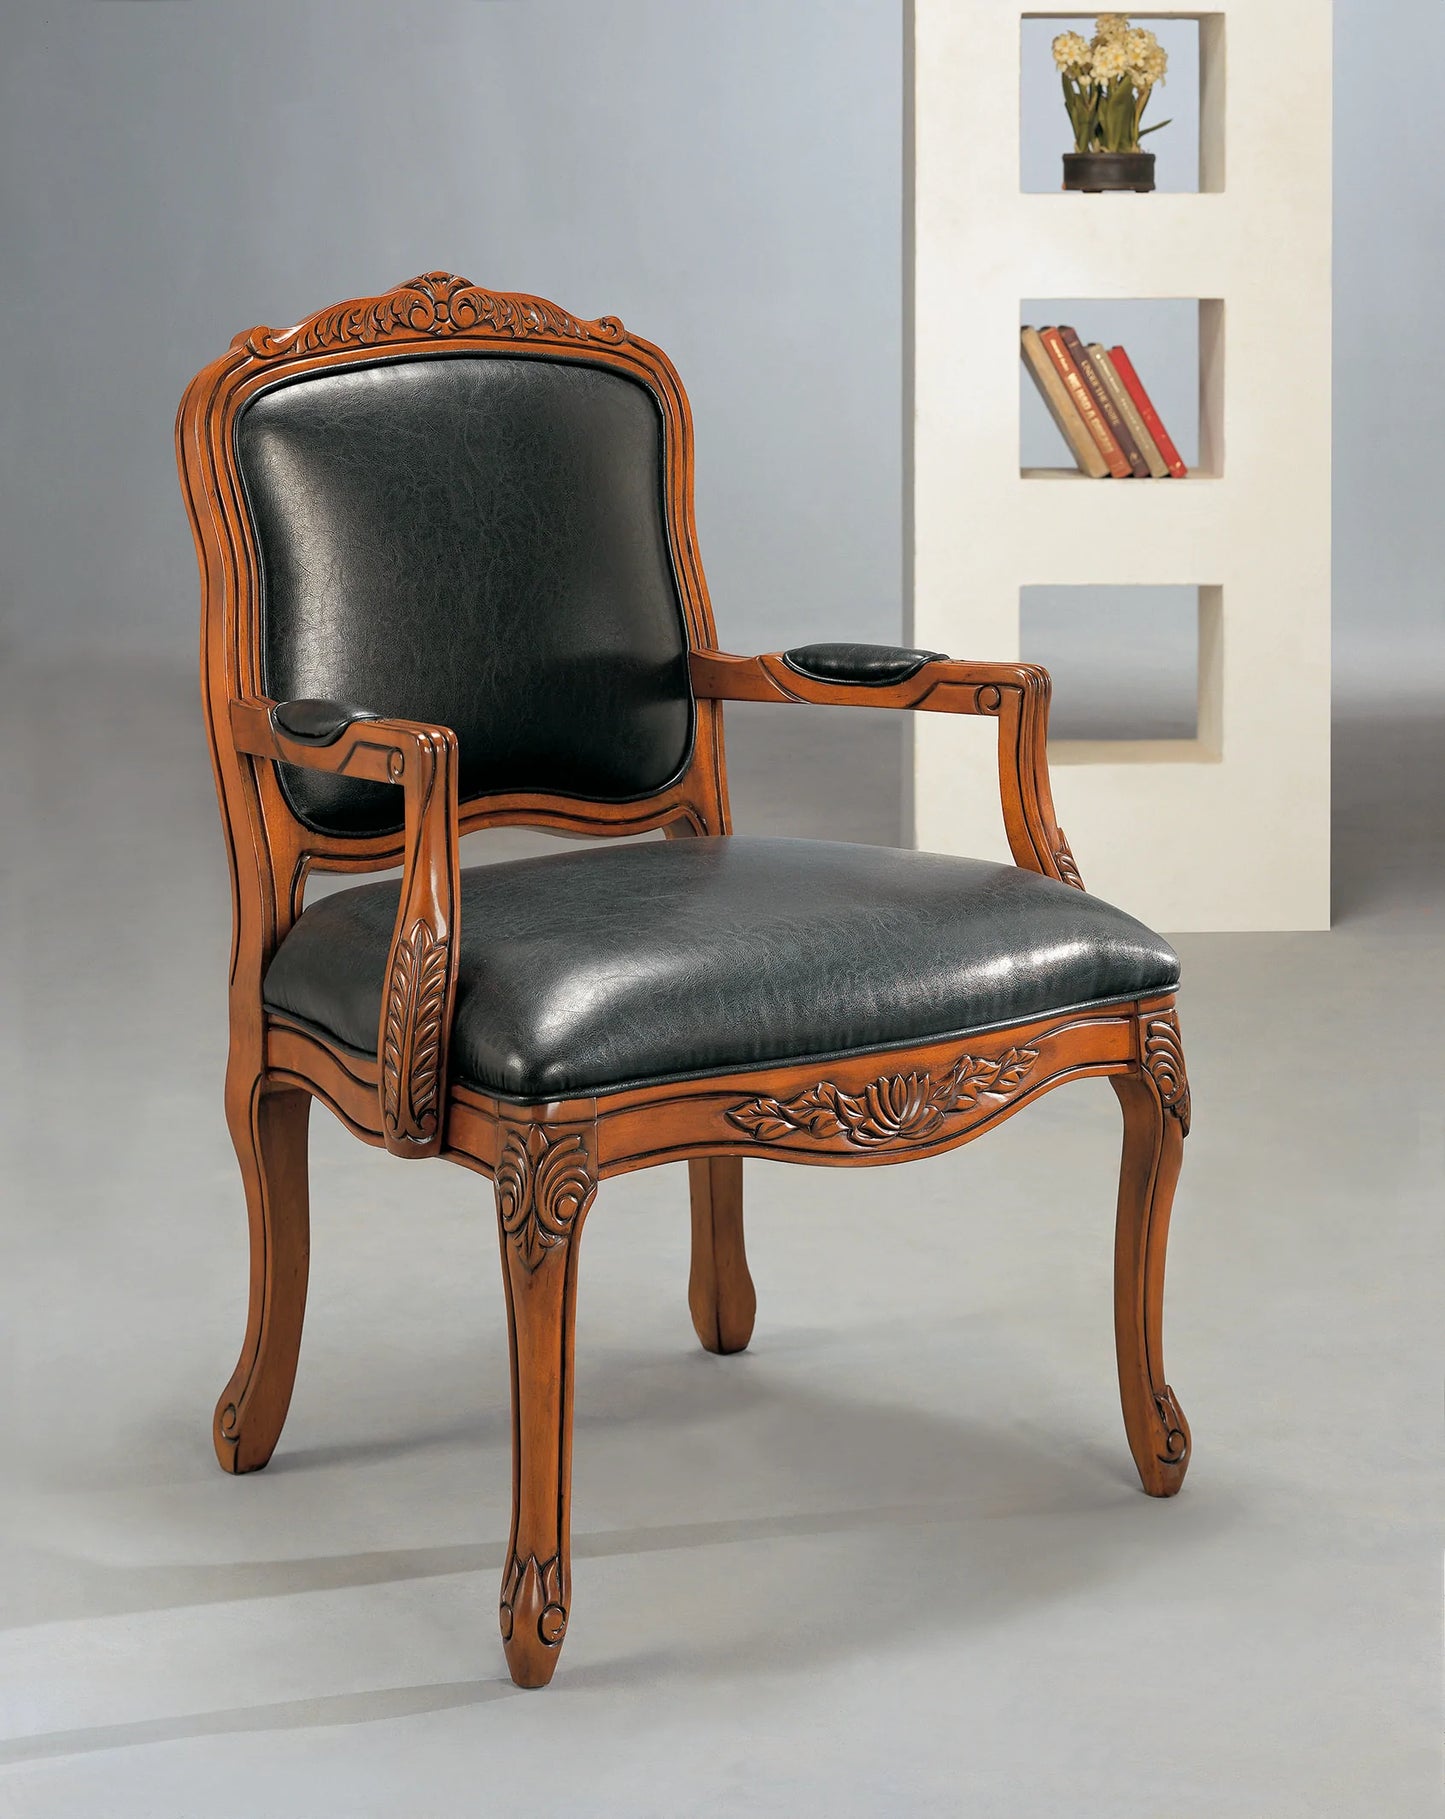 Espresso PU Cushion Accent Chair Product Description Accent Chair Cherry Wood Frame Espresso